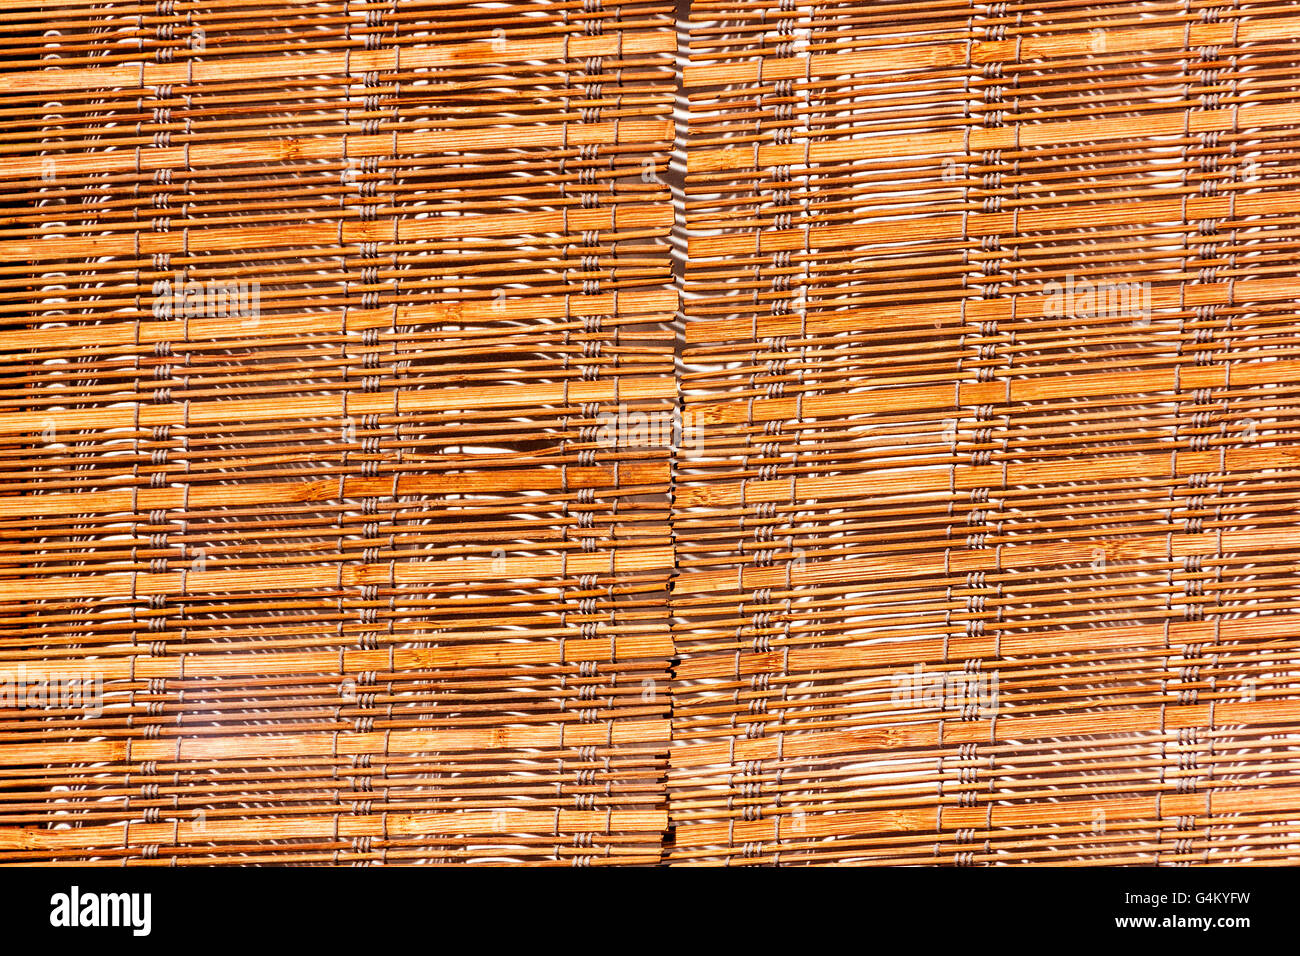 Close up of patterns and textures of brown bamboo blind Stock Photo